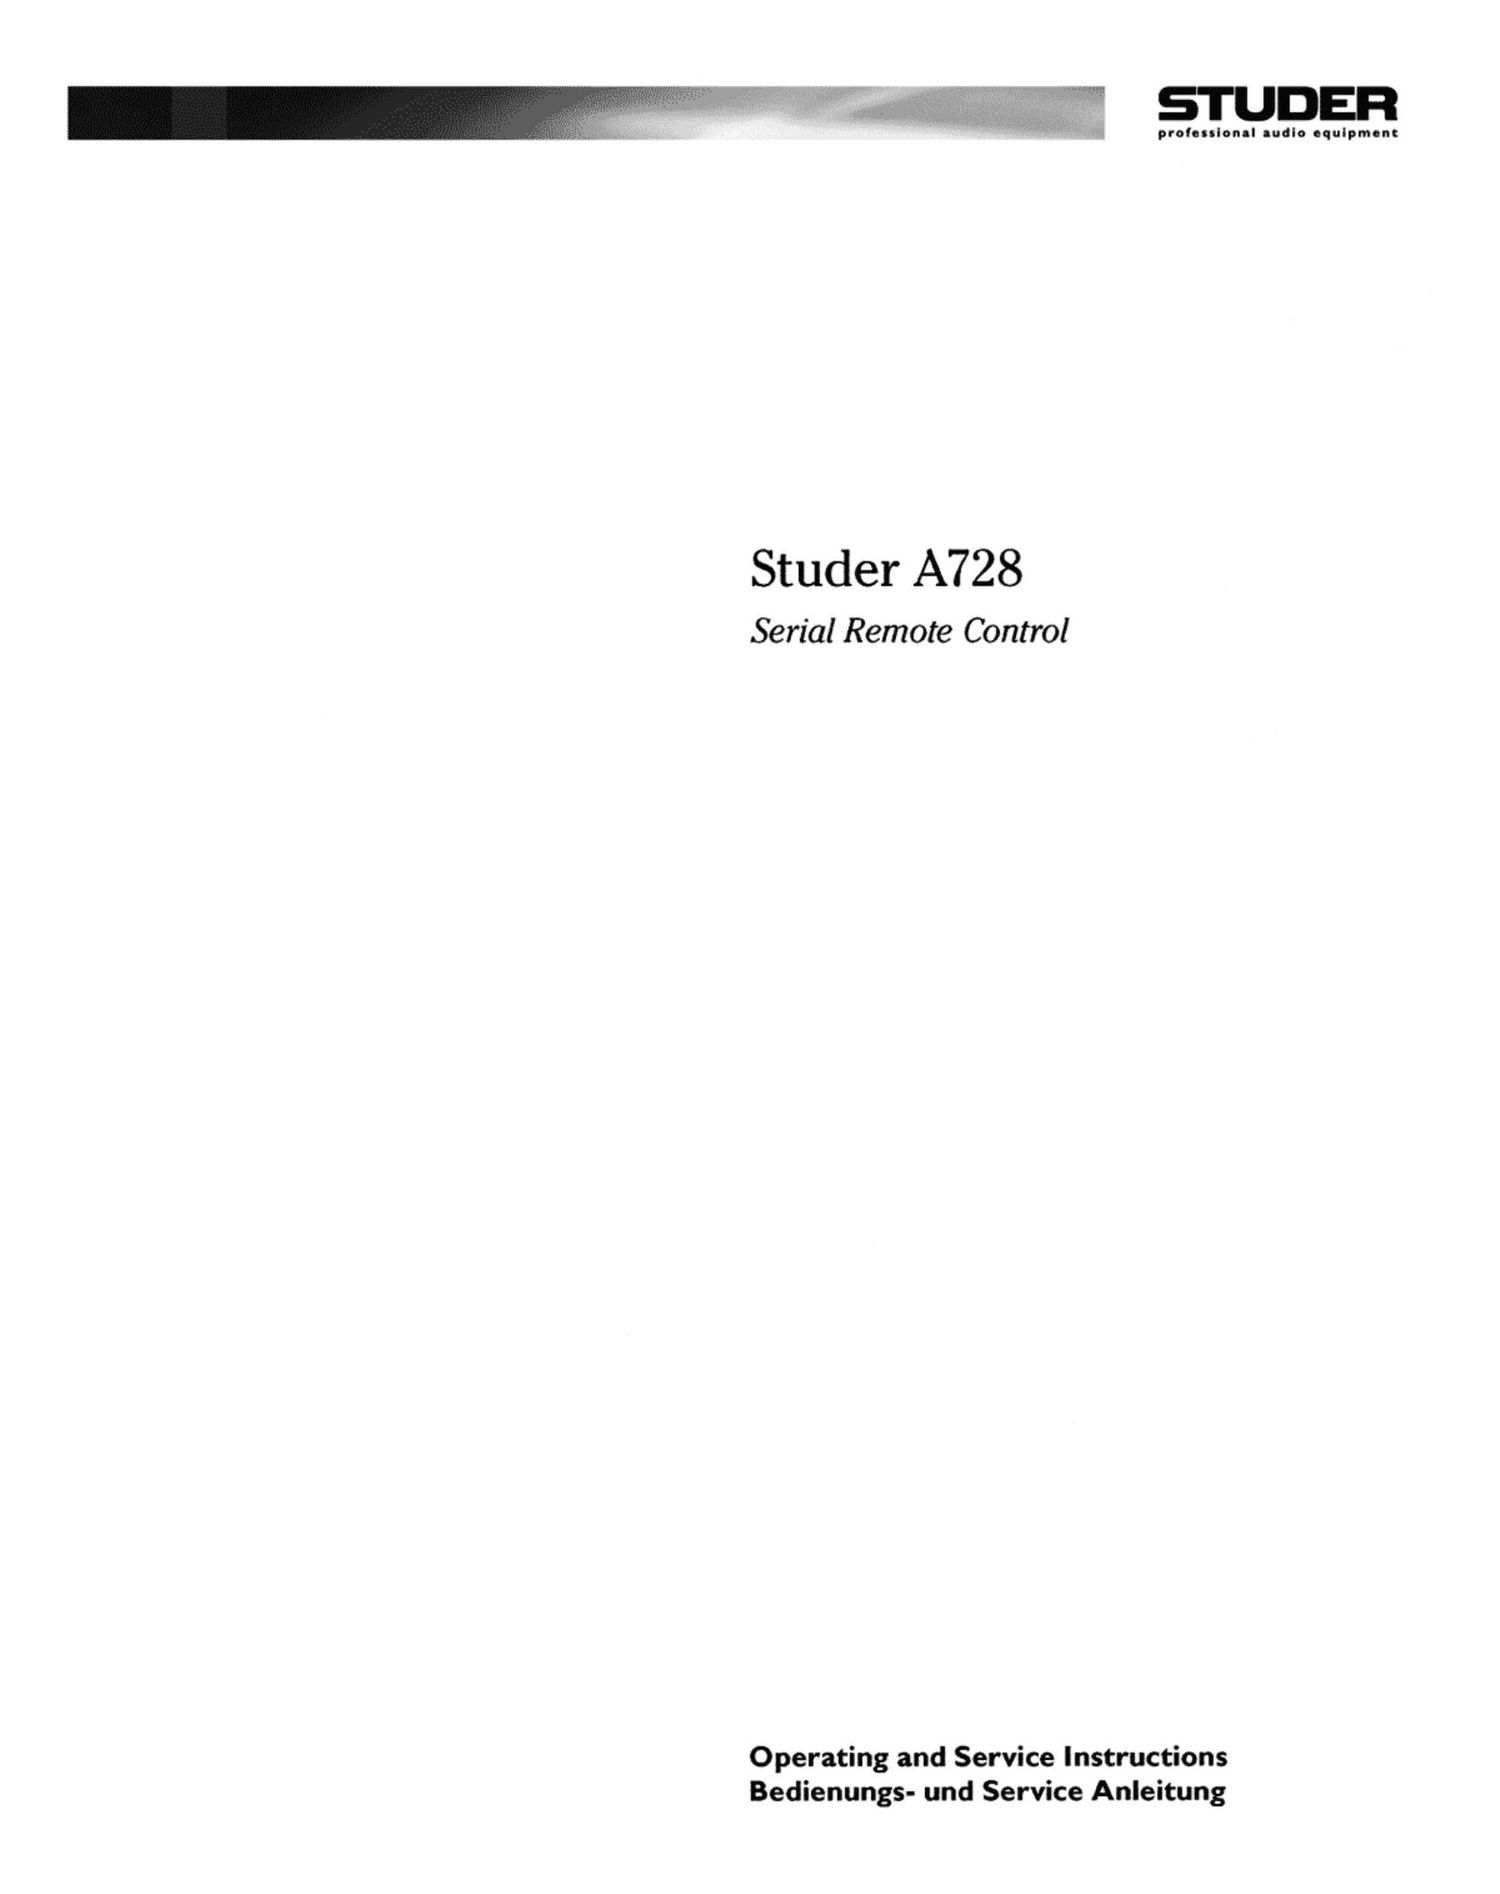 studer a 728 owners manual